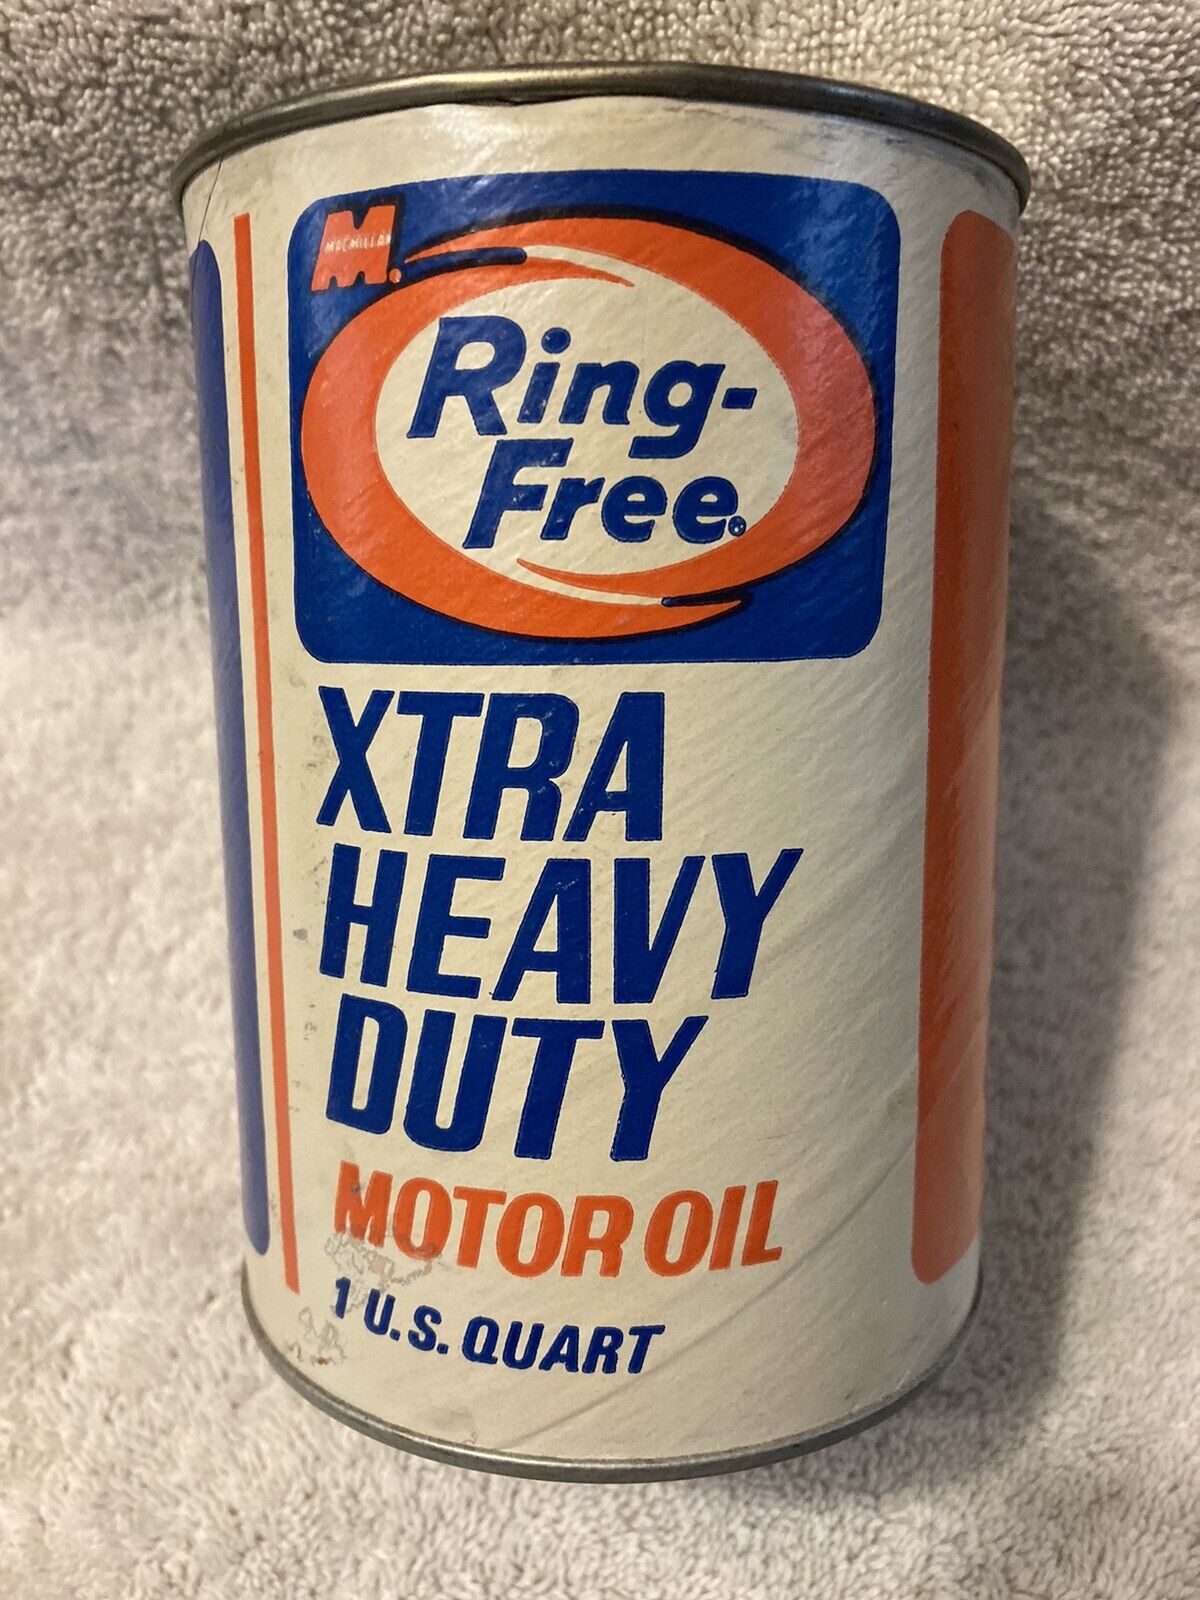 Vintage MacMillan RING-FREE XTRA HEAVY DUTY Motor Oil 1 qt. Can Coin Bank, 1968.